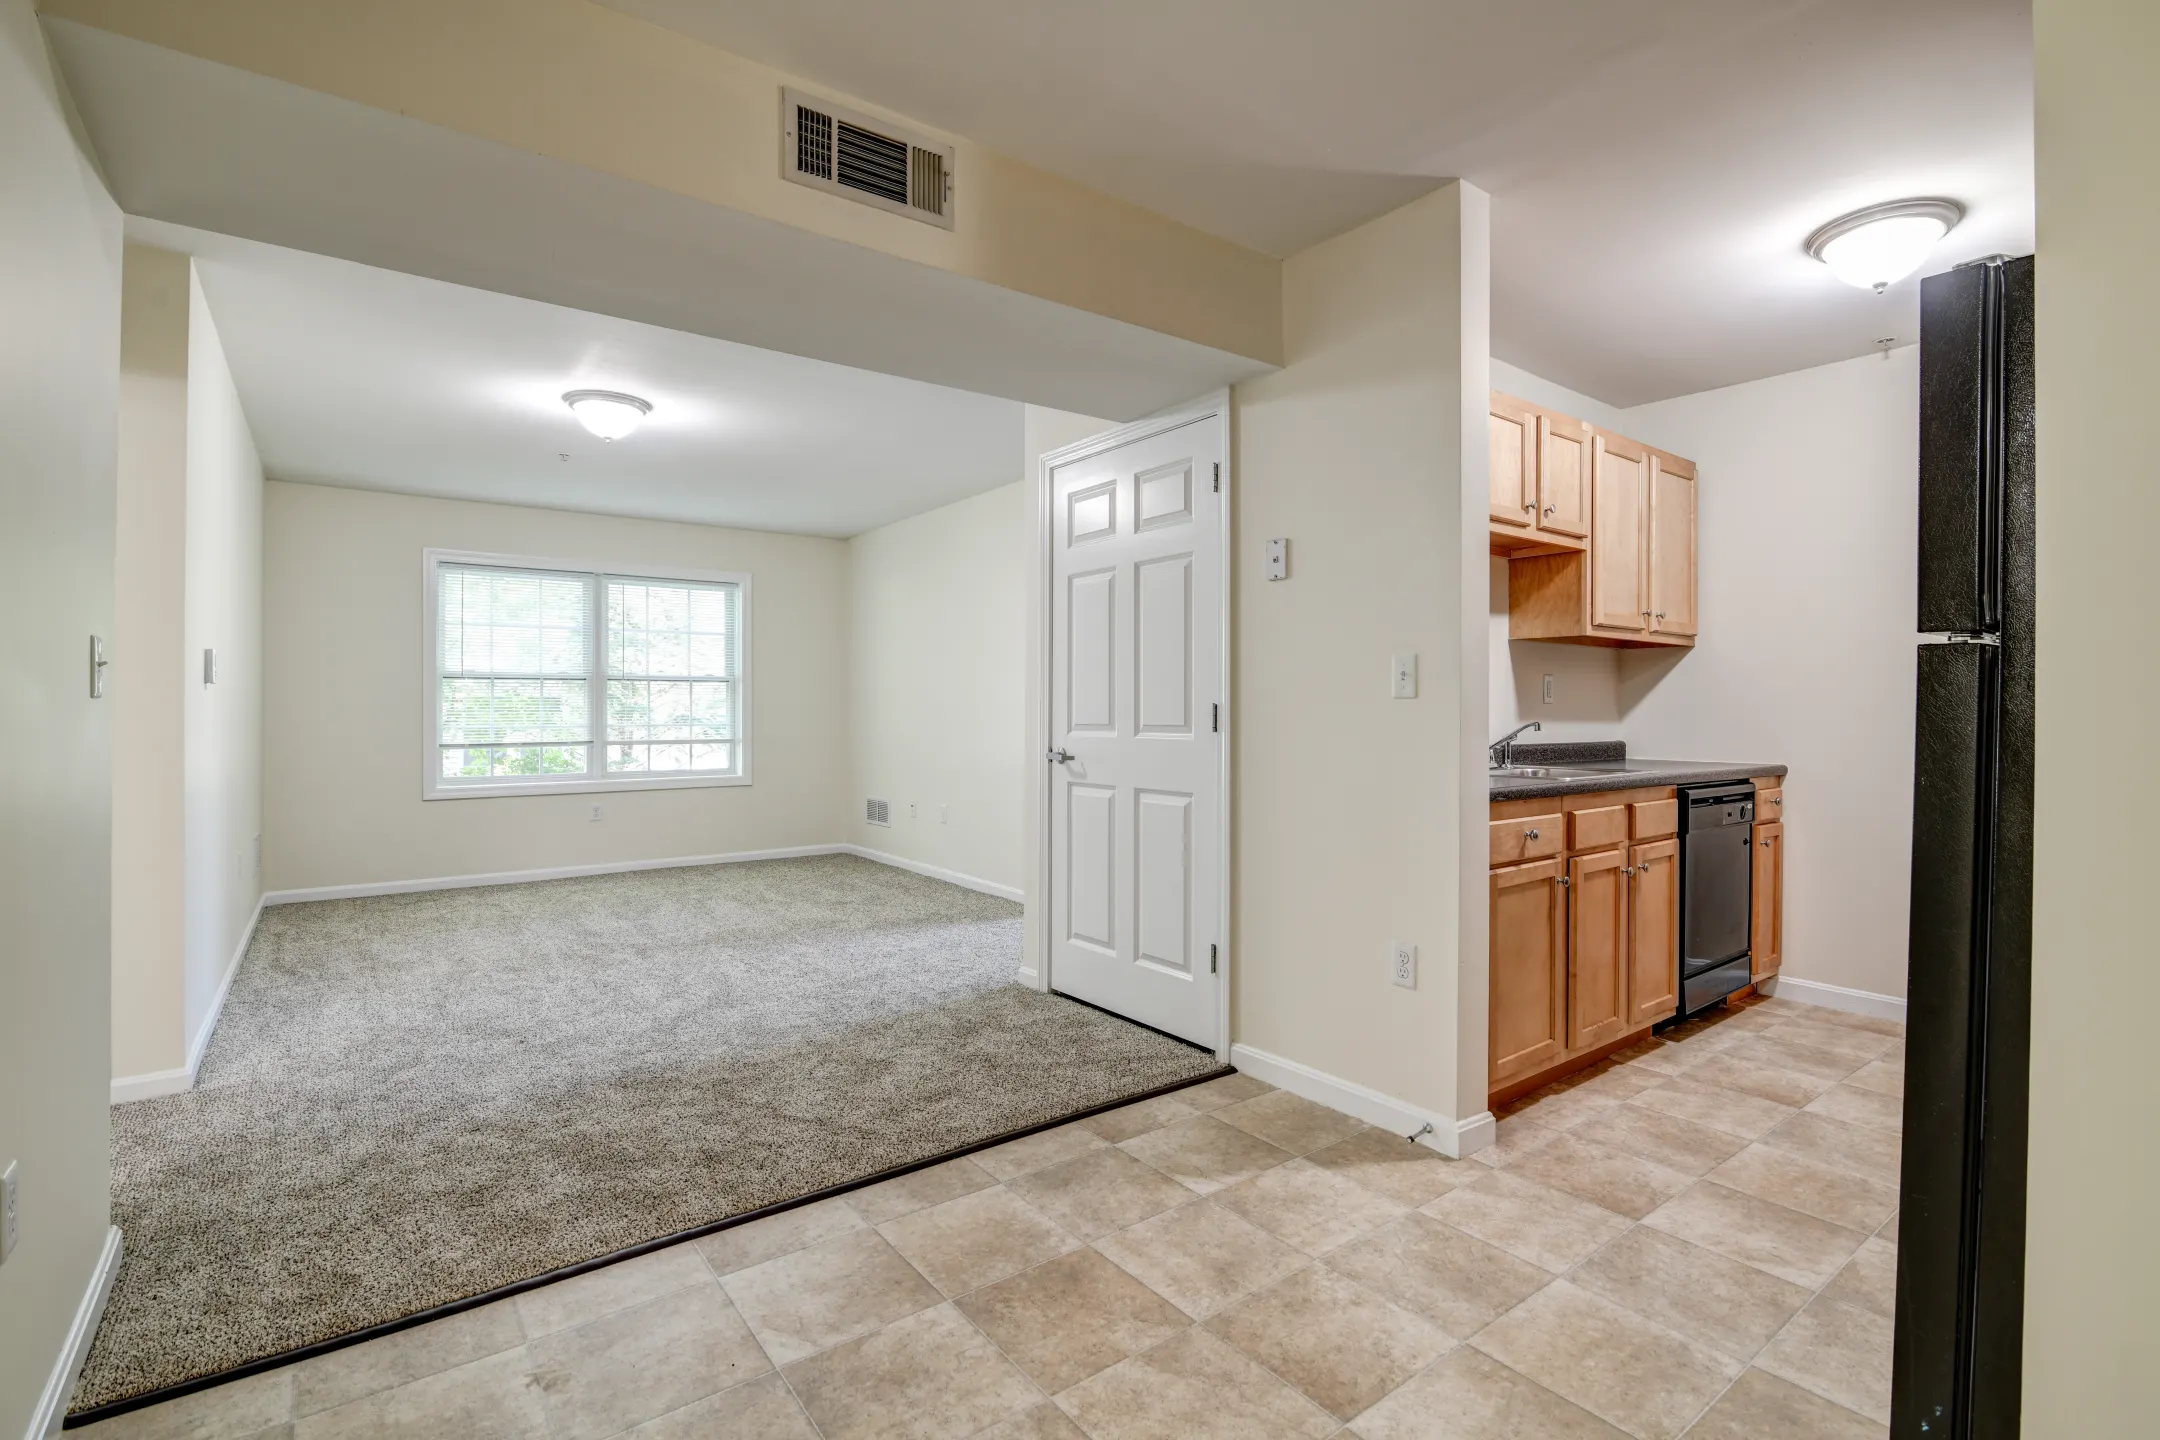 Kitchen - Redstone Apartments and Single Family Homes - Manchester, NH